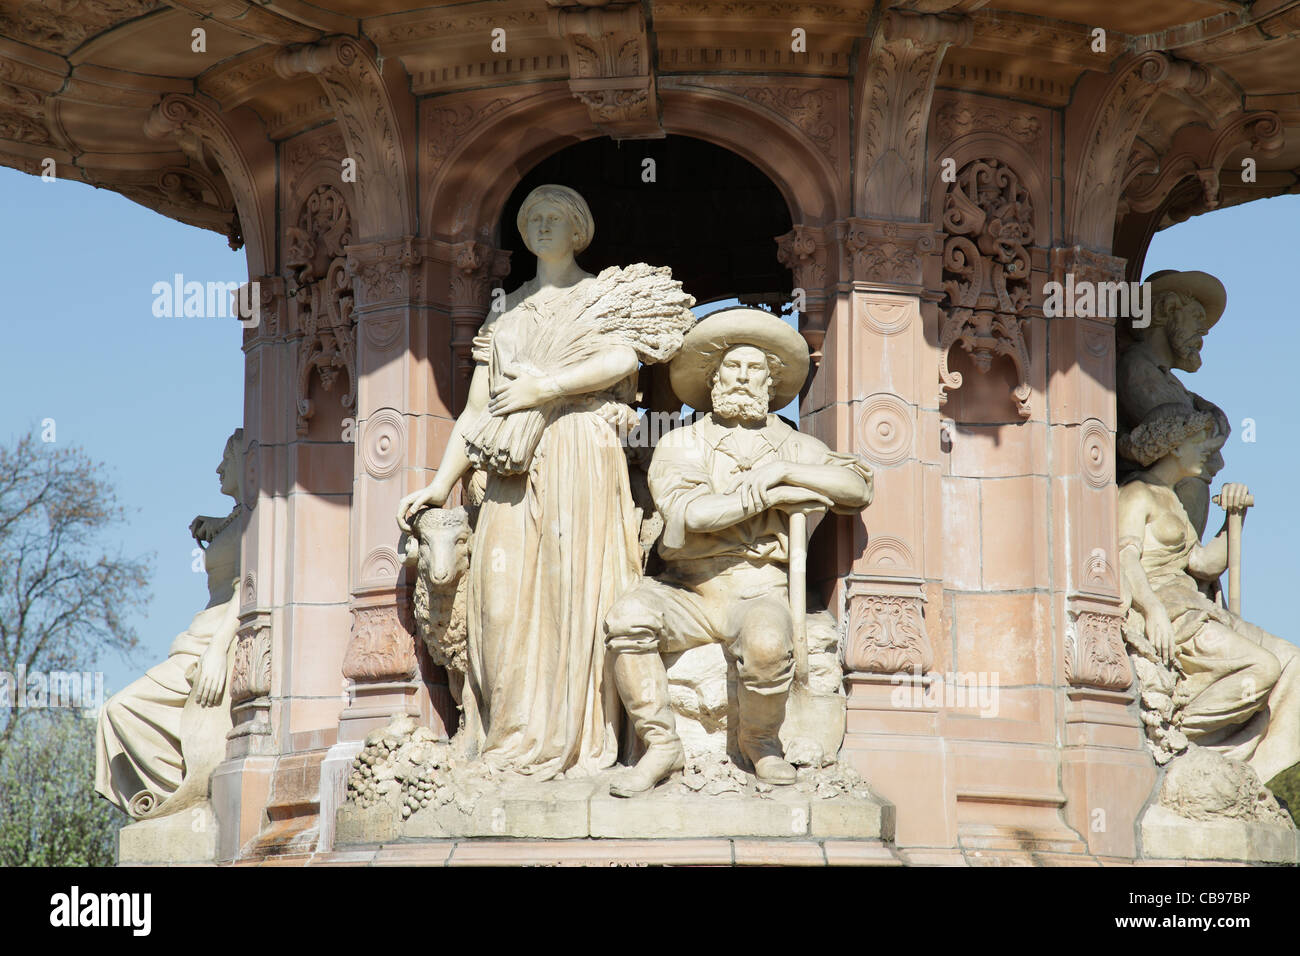 Detail of the Doulton Fountain on Glasgow Green the largest terracotta fountain in the world, Scotland UK. Stock Photo